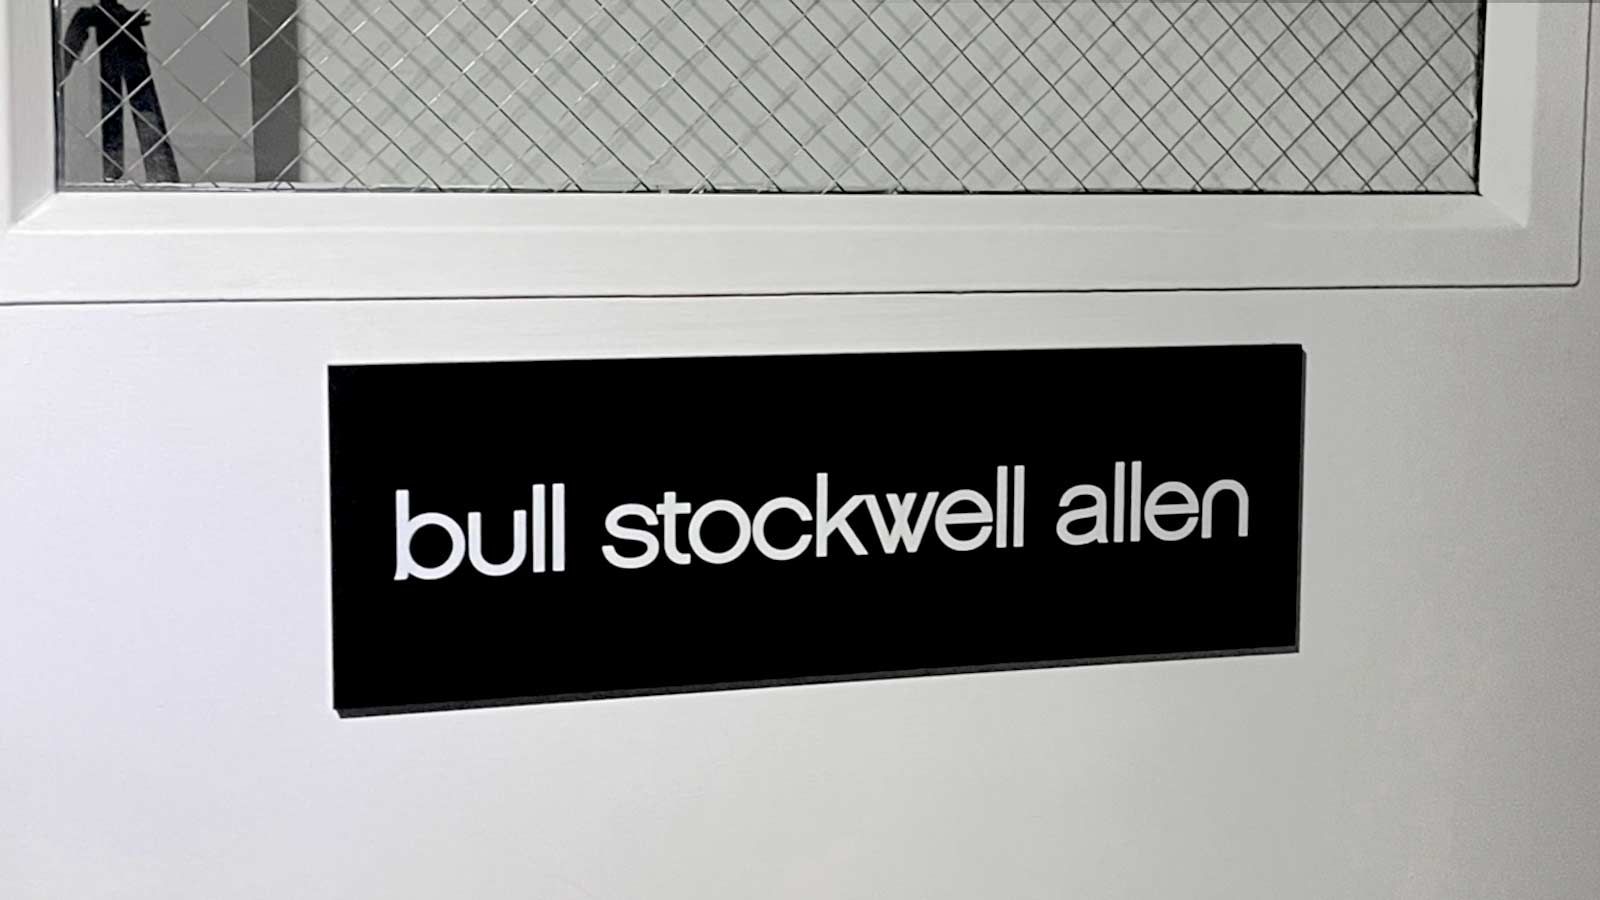 Bull Stockwell Allen interior sign installed on the wall